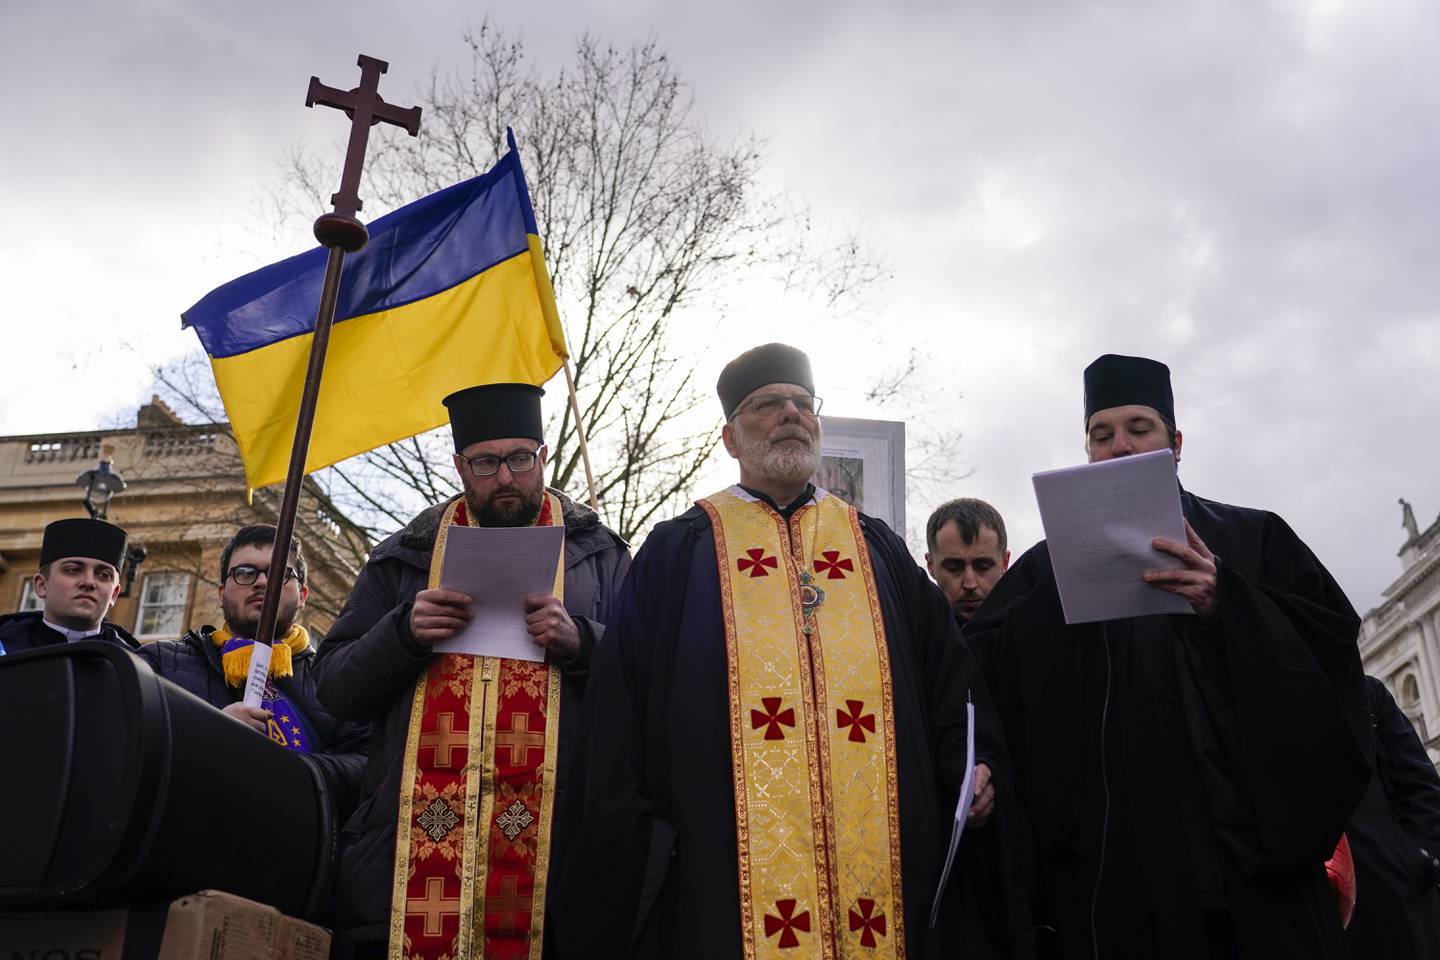 Members of the Orthodox Church attend a demonstration outside Downing Street in support of Ukraine, in London, Thursday, Feb. 24, 2022. Russian President Vladimir Putin on Thursday announced a military operation in Ukraine and warned other countries that any attempt to interfere with the Russian action would lead to 'consequences you have never seen.' (AP Photo/Alberto Pezzali)